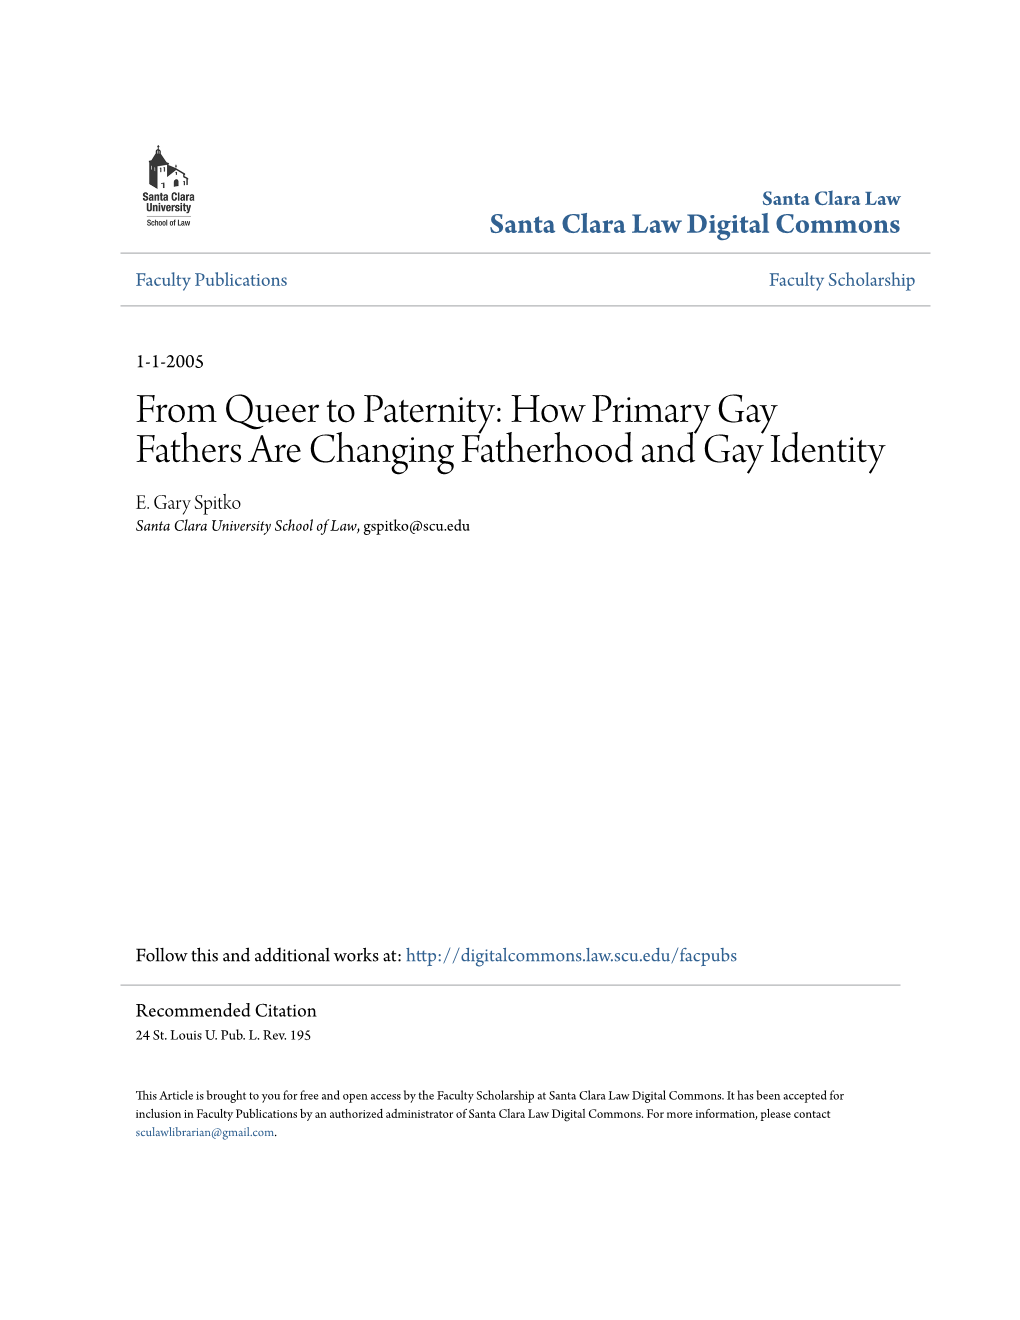 From Queer to Paternity: How Primary Gay Fathers Are Changing Fatherhood and Gay Identity E